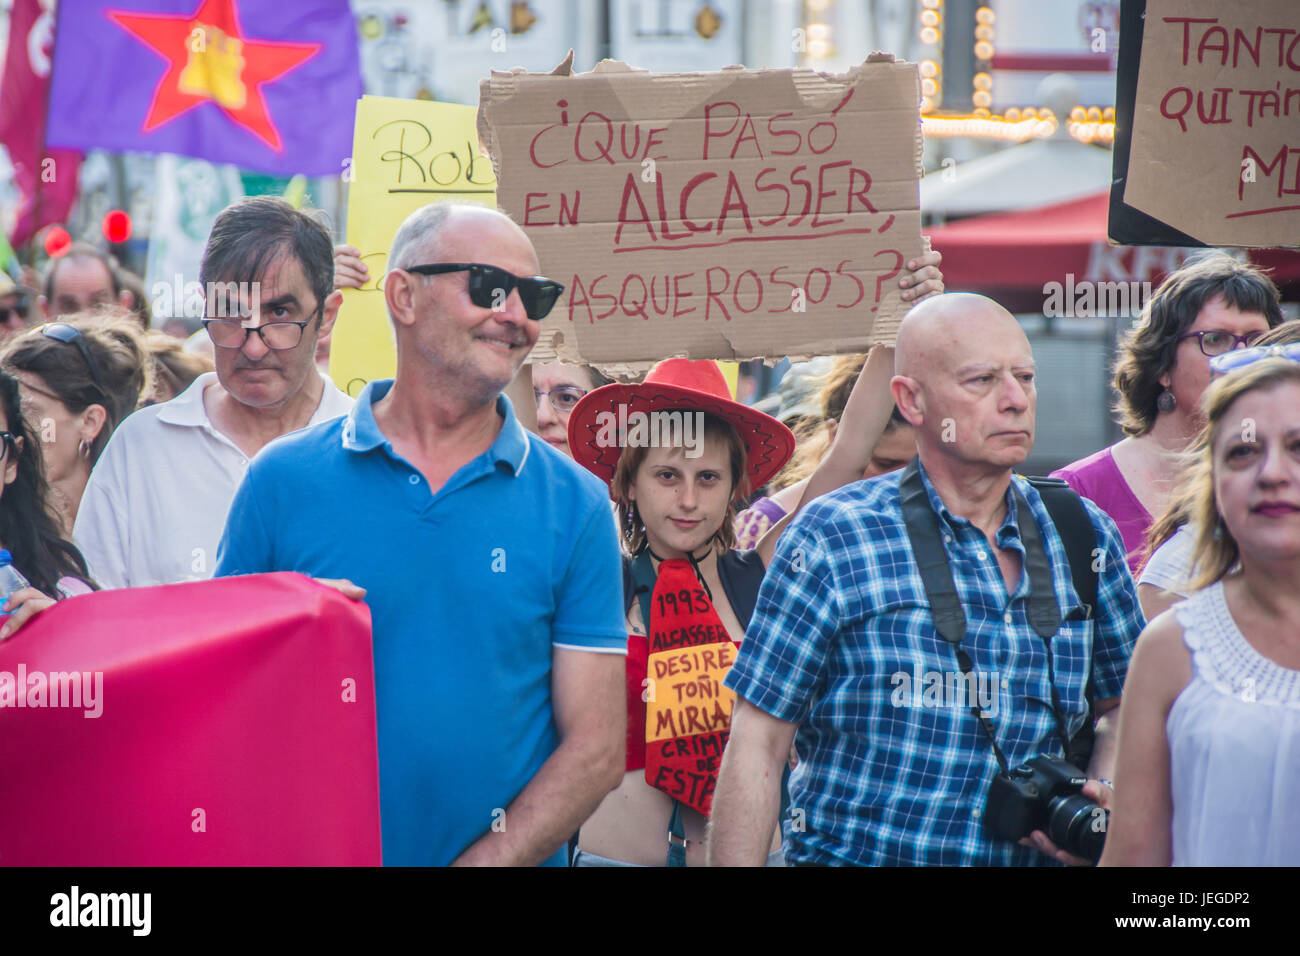 Madrid, Spain. 24th Jun, 2017.   Protest against corruption in Madrid, the demonstration took place from Glorieta de Embajadores to square Puerta del Sol.   The demonstration is about the corruption of the government of partido popular of Mariano Rajoy in Madrid, Spain. Credit: Alberto Sibaja Ramírez/Alamy Live News Stock Photo